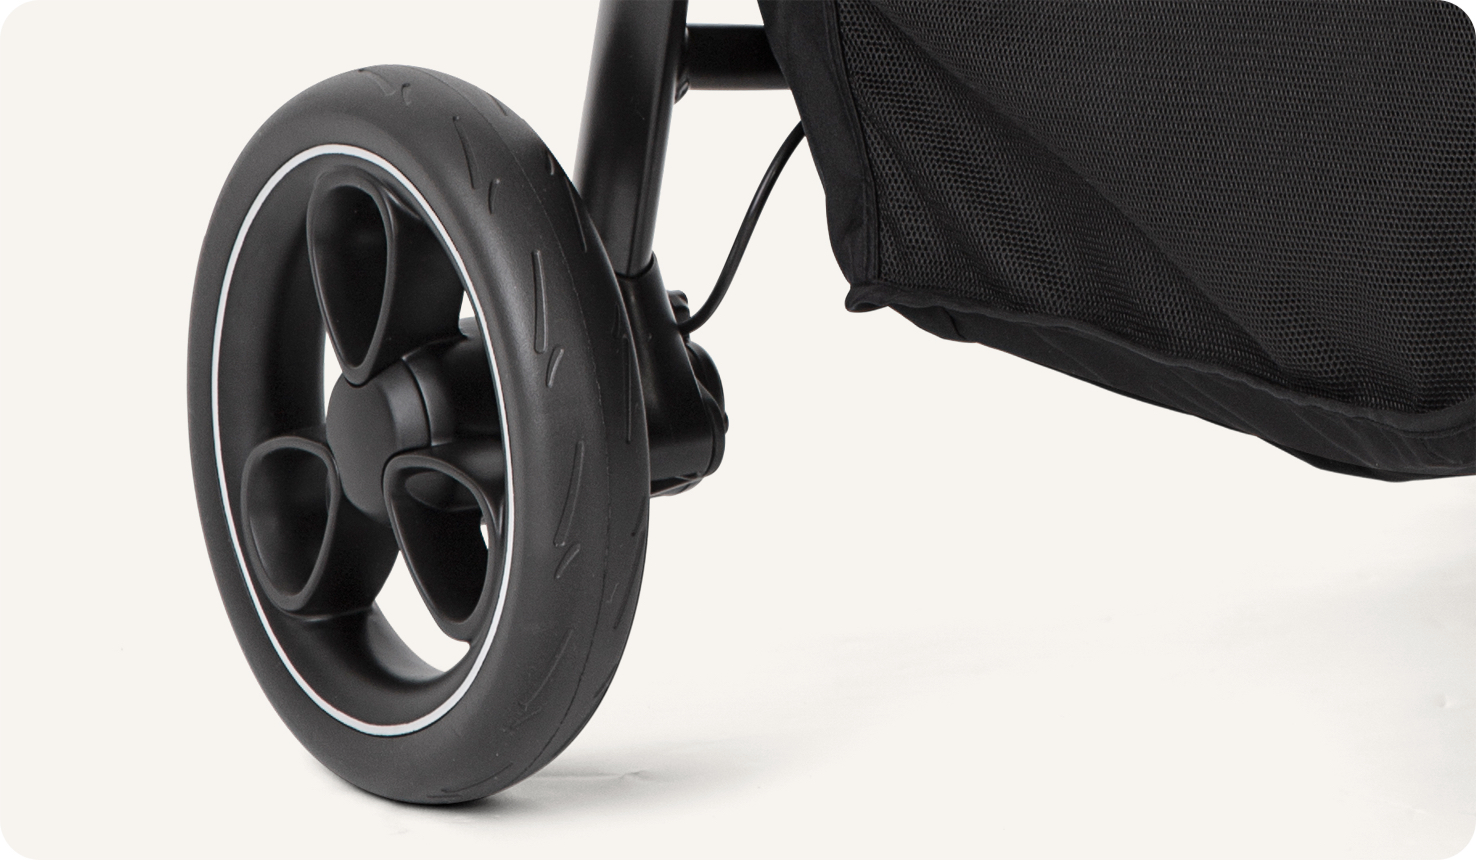  Joie litetrax 4 stroller in gray close-up of puncture proof tyre.  